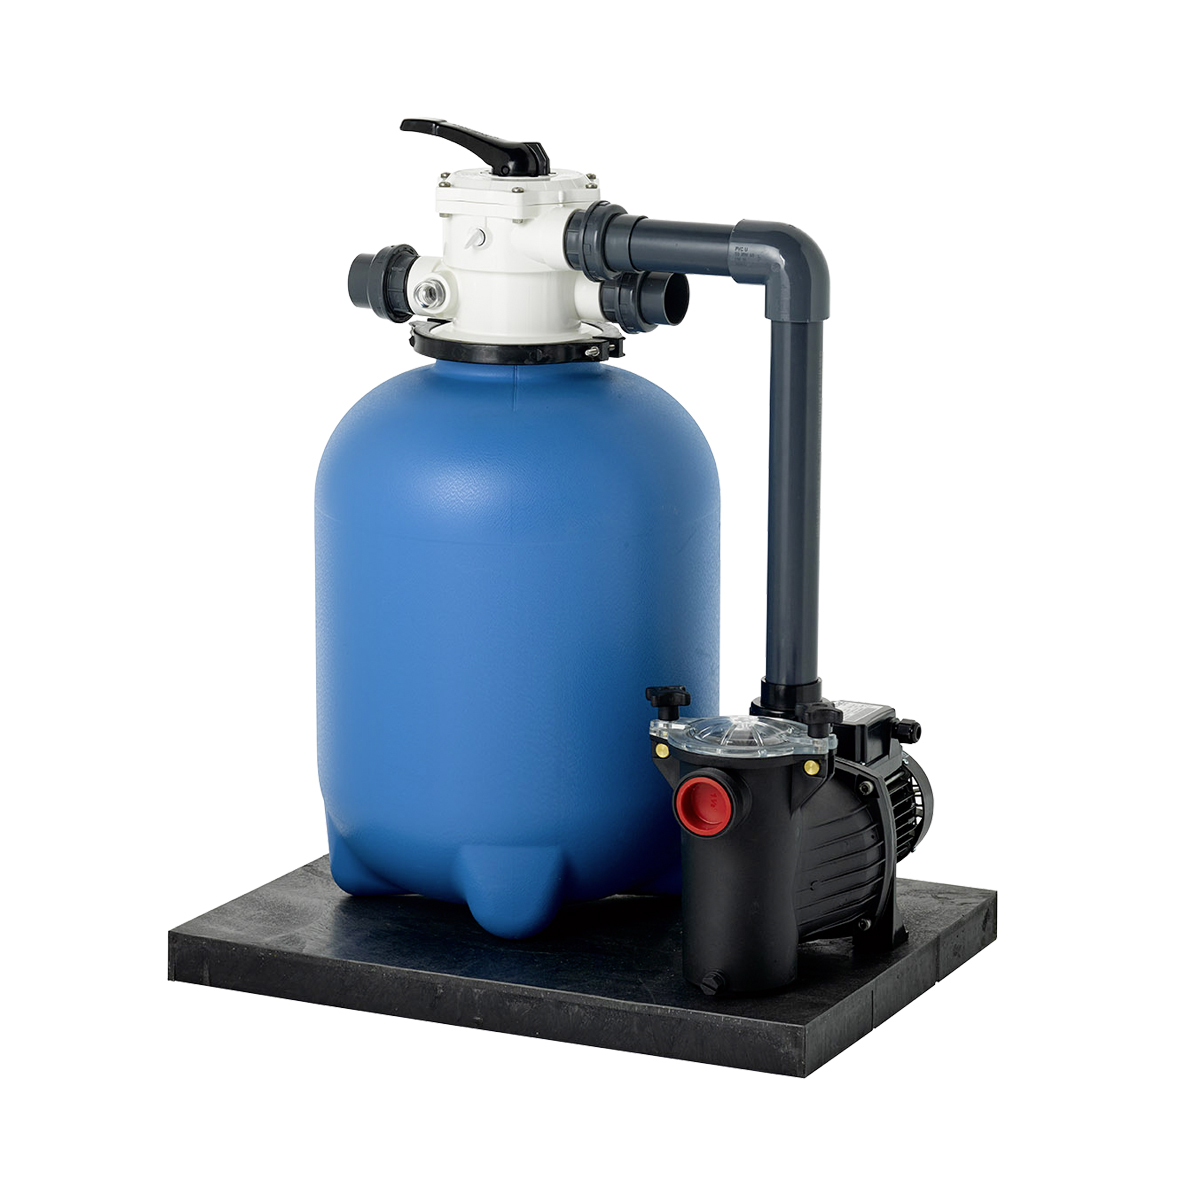 Compact filter system ATTERSEE D500 black, incl. original Praher 6-way valve 1 1/2", incl. pump 0,33 kW(0,50 HP) 10 m3/H Compact filter system ATTERSEE D500 black, incl. original Praher 6-way valve 1 1/2", incl. pump 0,33 kW(0,50 HP) 10 m3/H